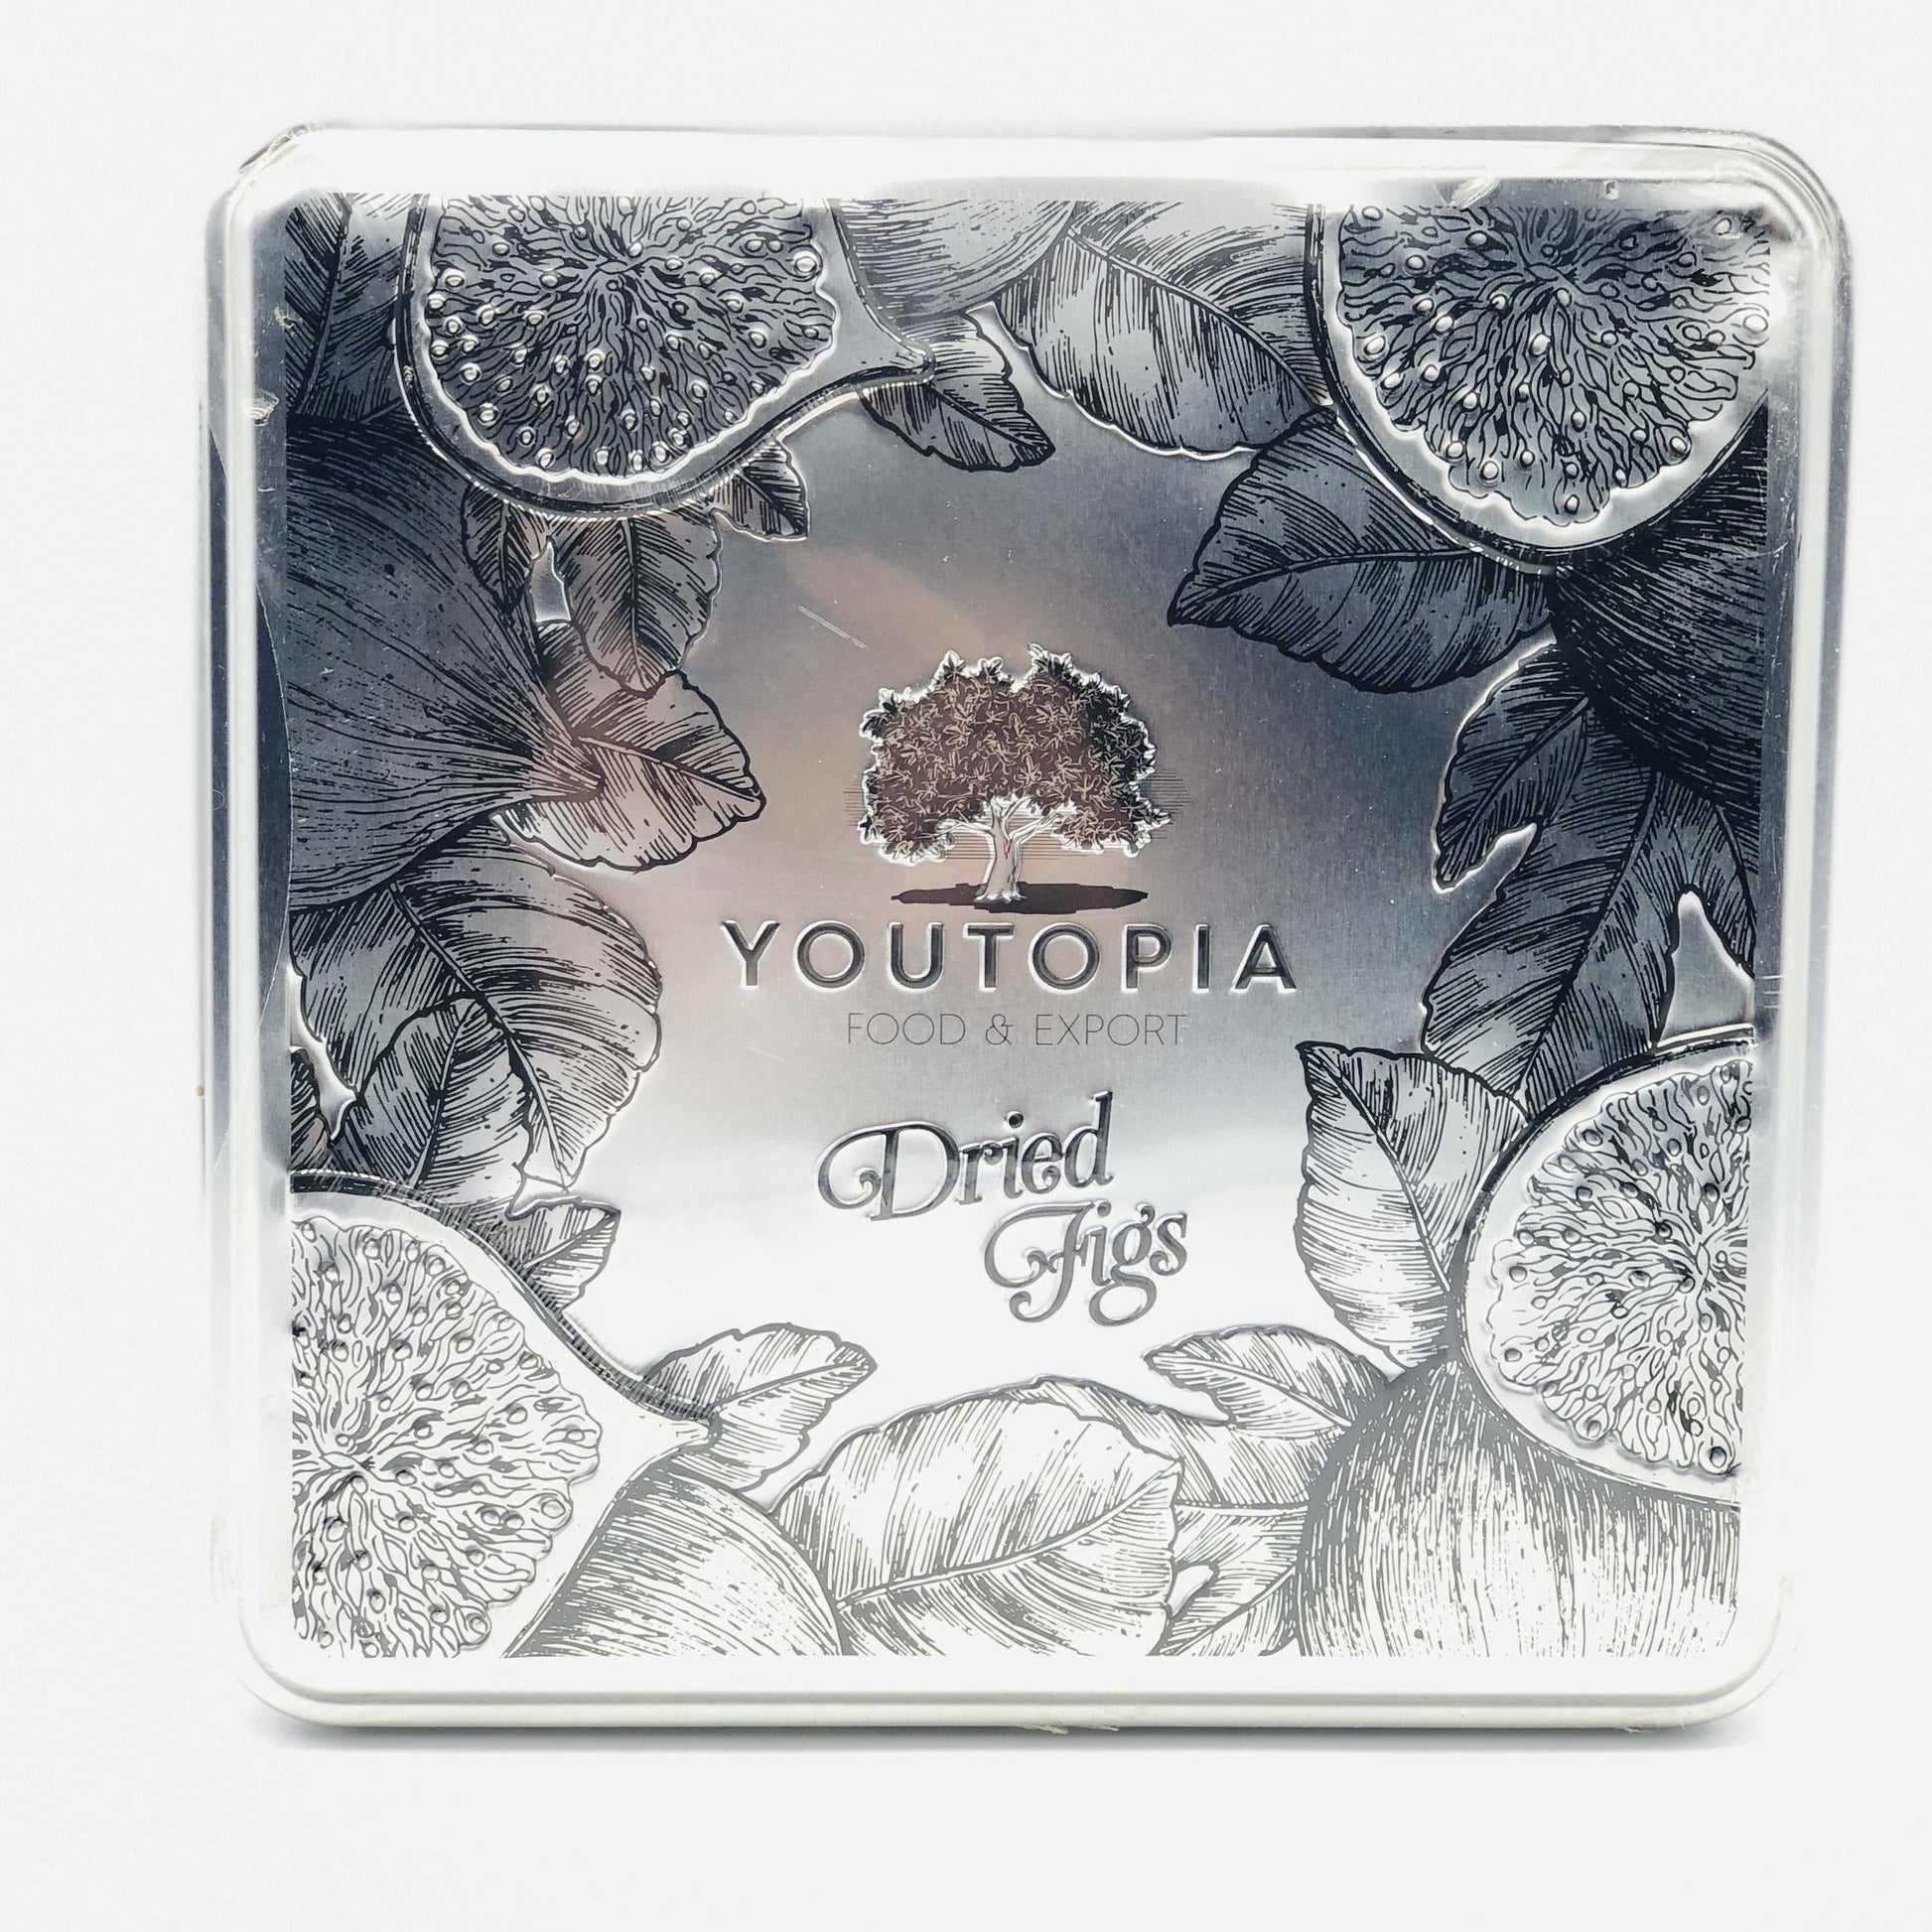 Youtopia, Export Quality Dried Figs in Metal Box, 720g